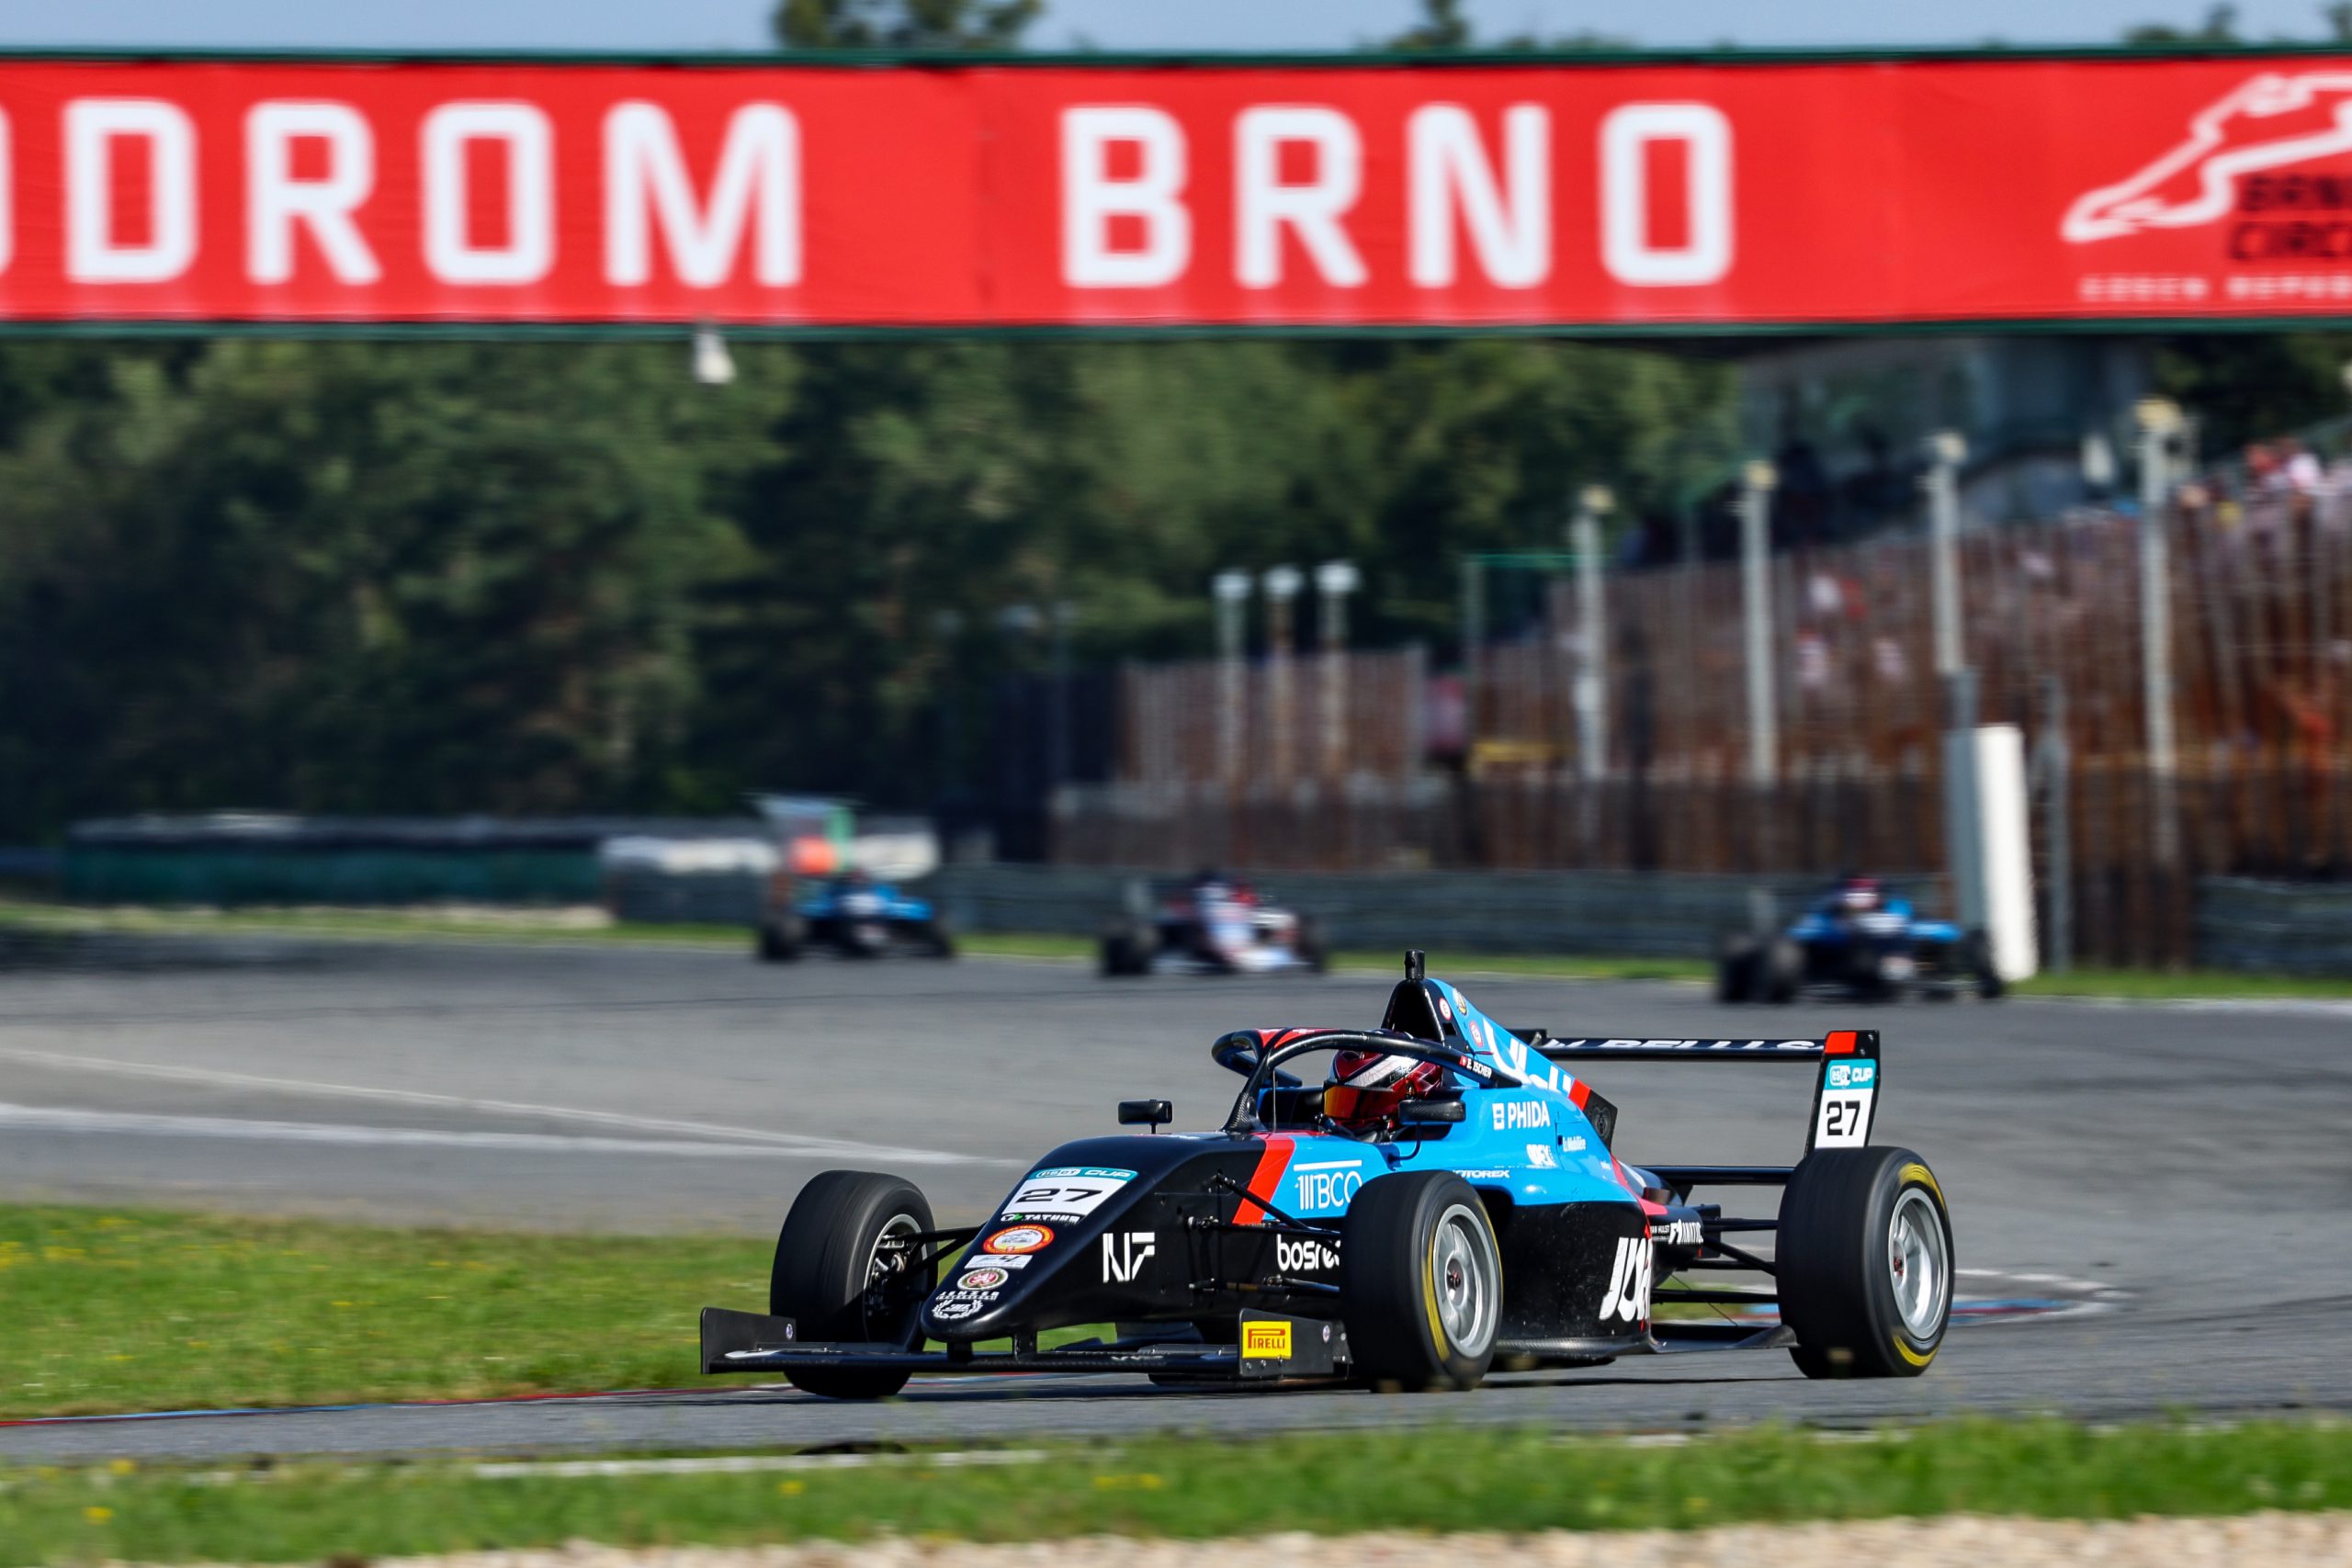 Reno Francot and Ethan Ischer take turns at the top in Brno